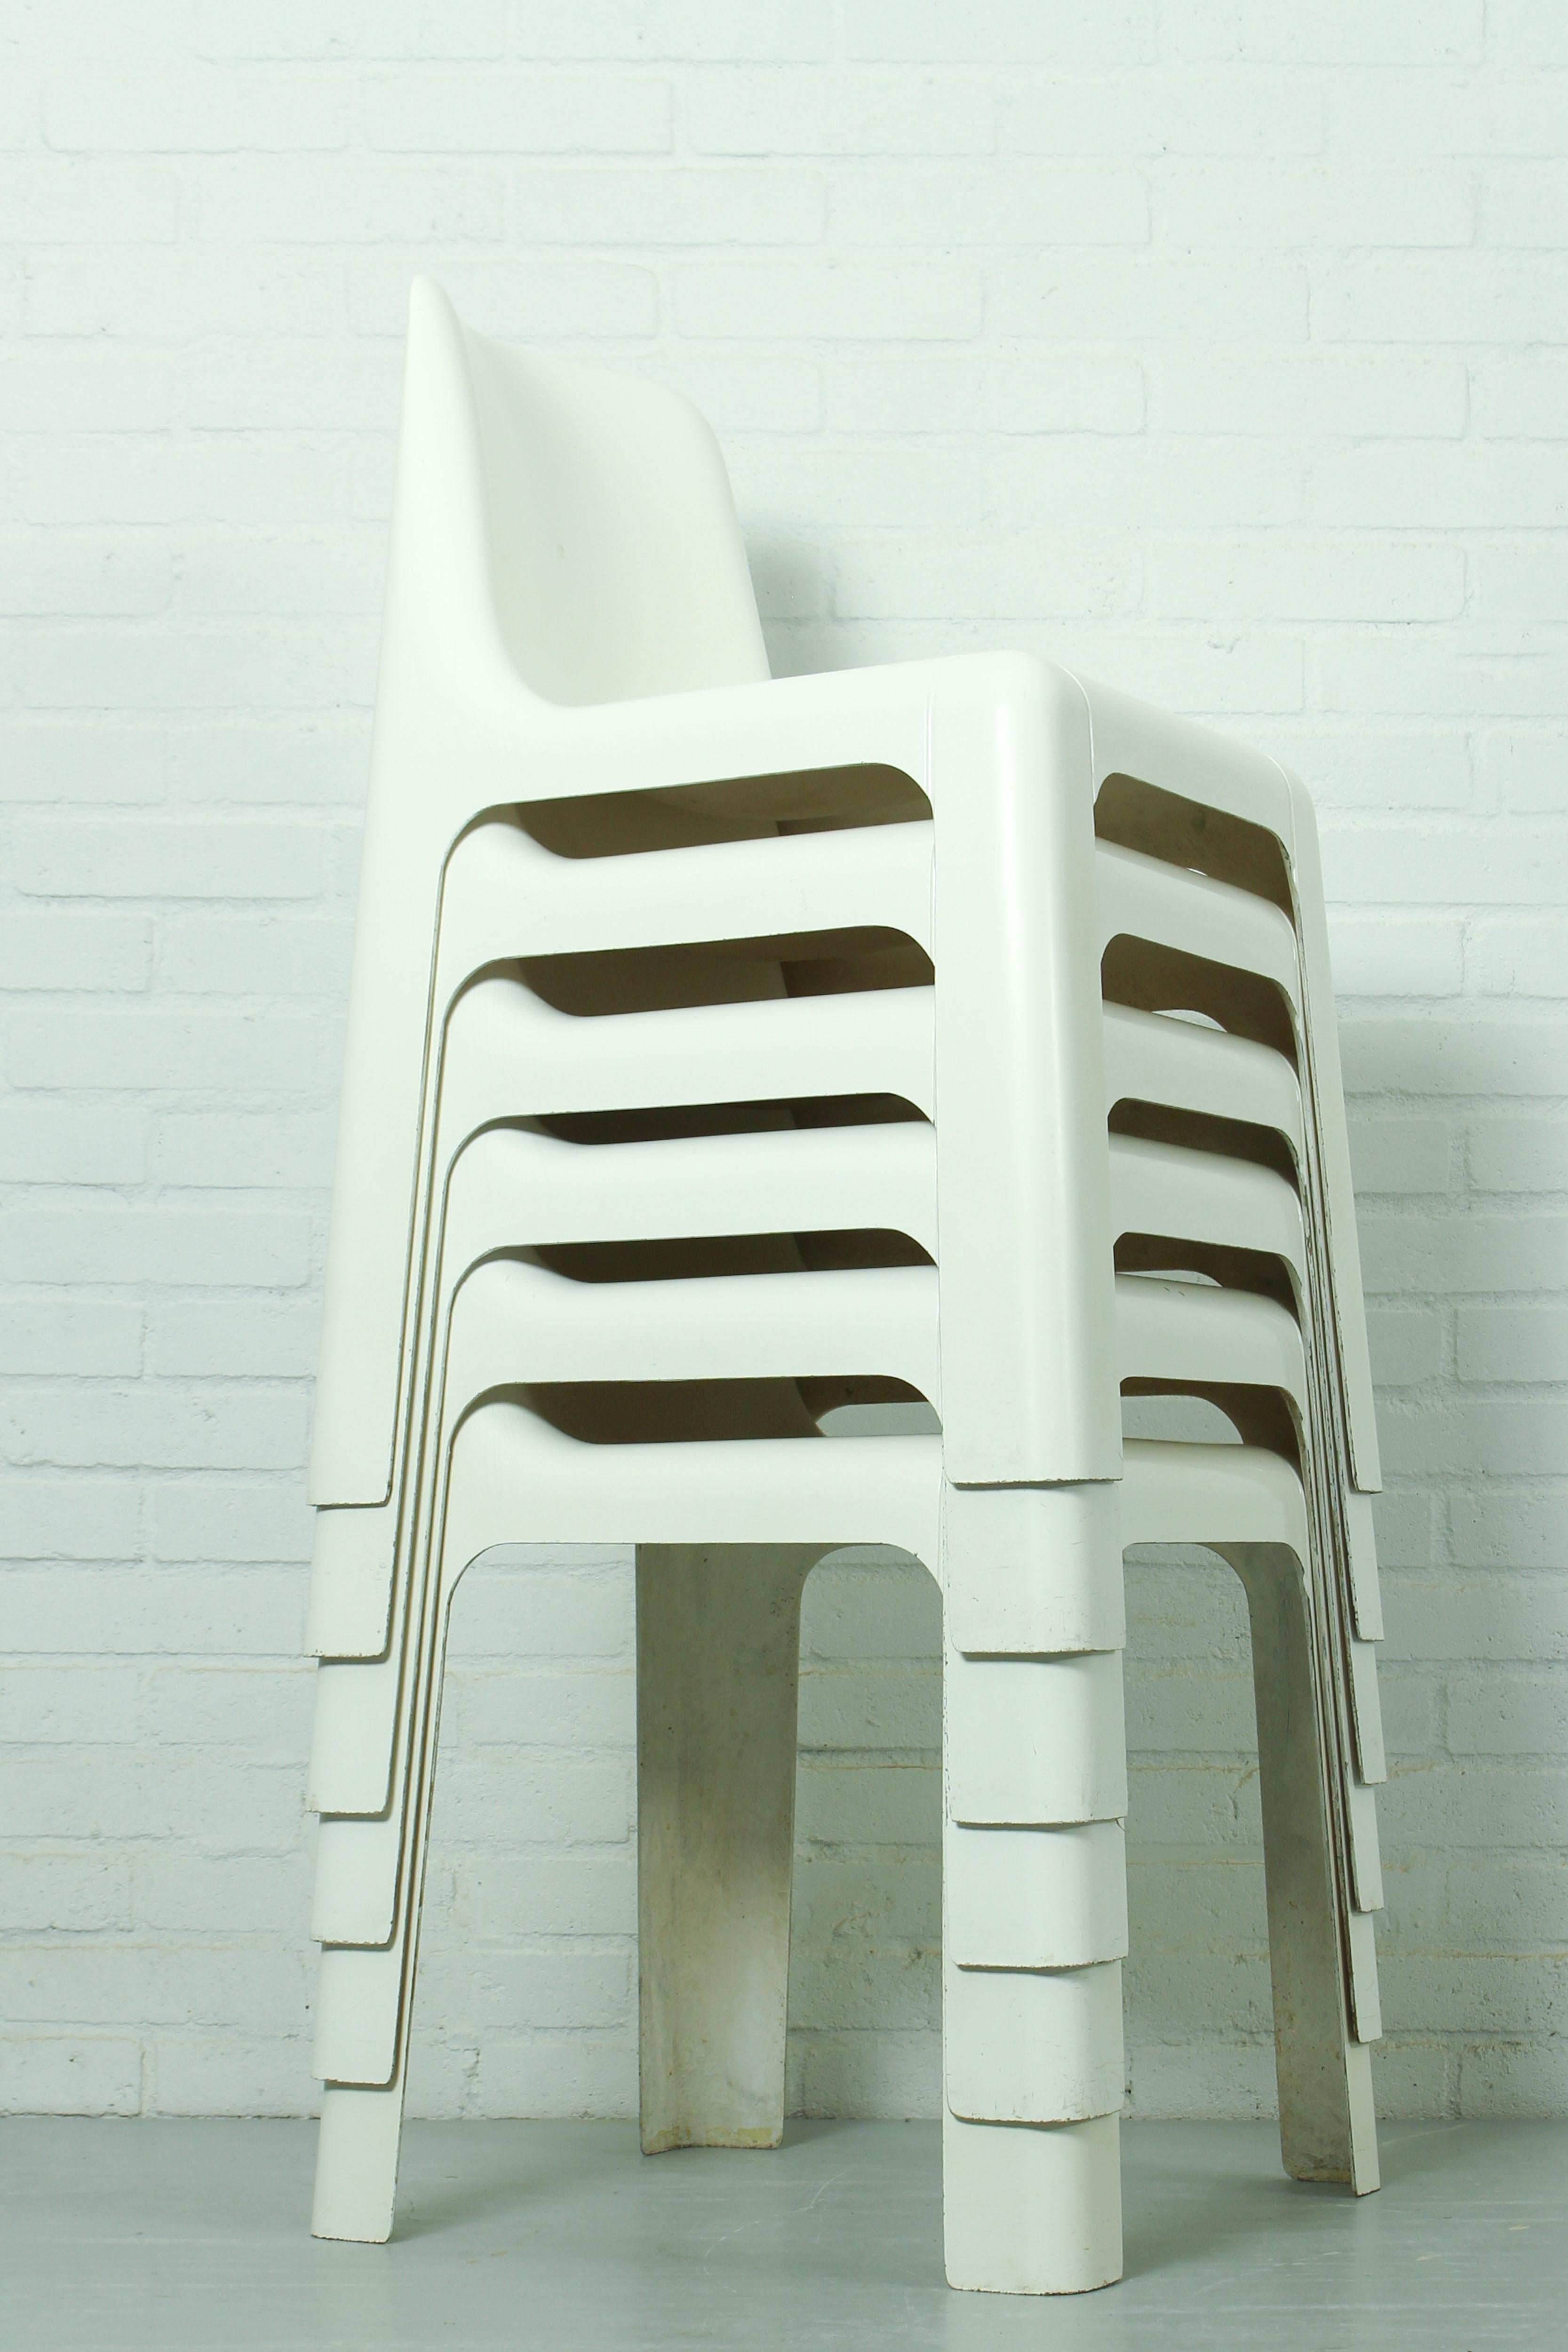 6 OZOO 700 Fiberglass Dining Chairs by Marc Berthier for Roche Bobois, 1970s For Sale 9